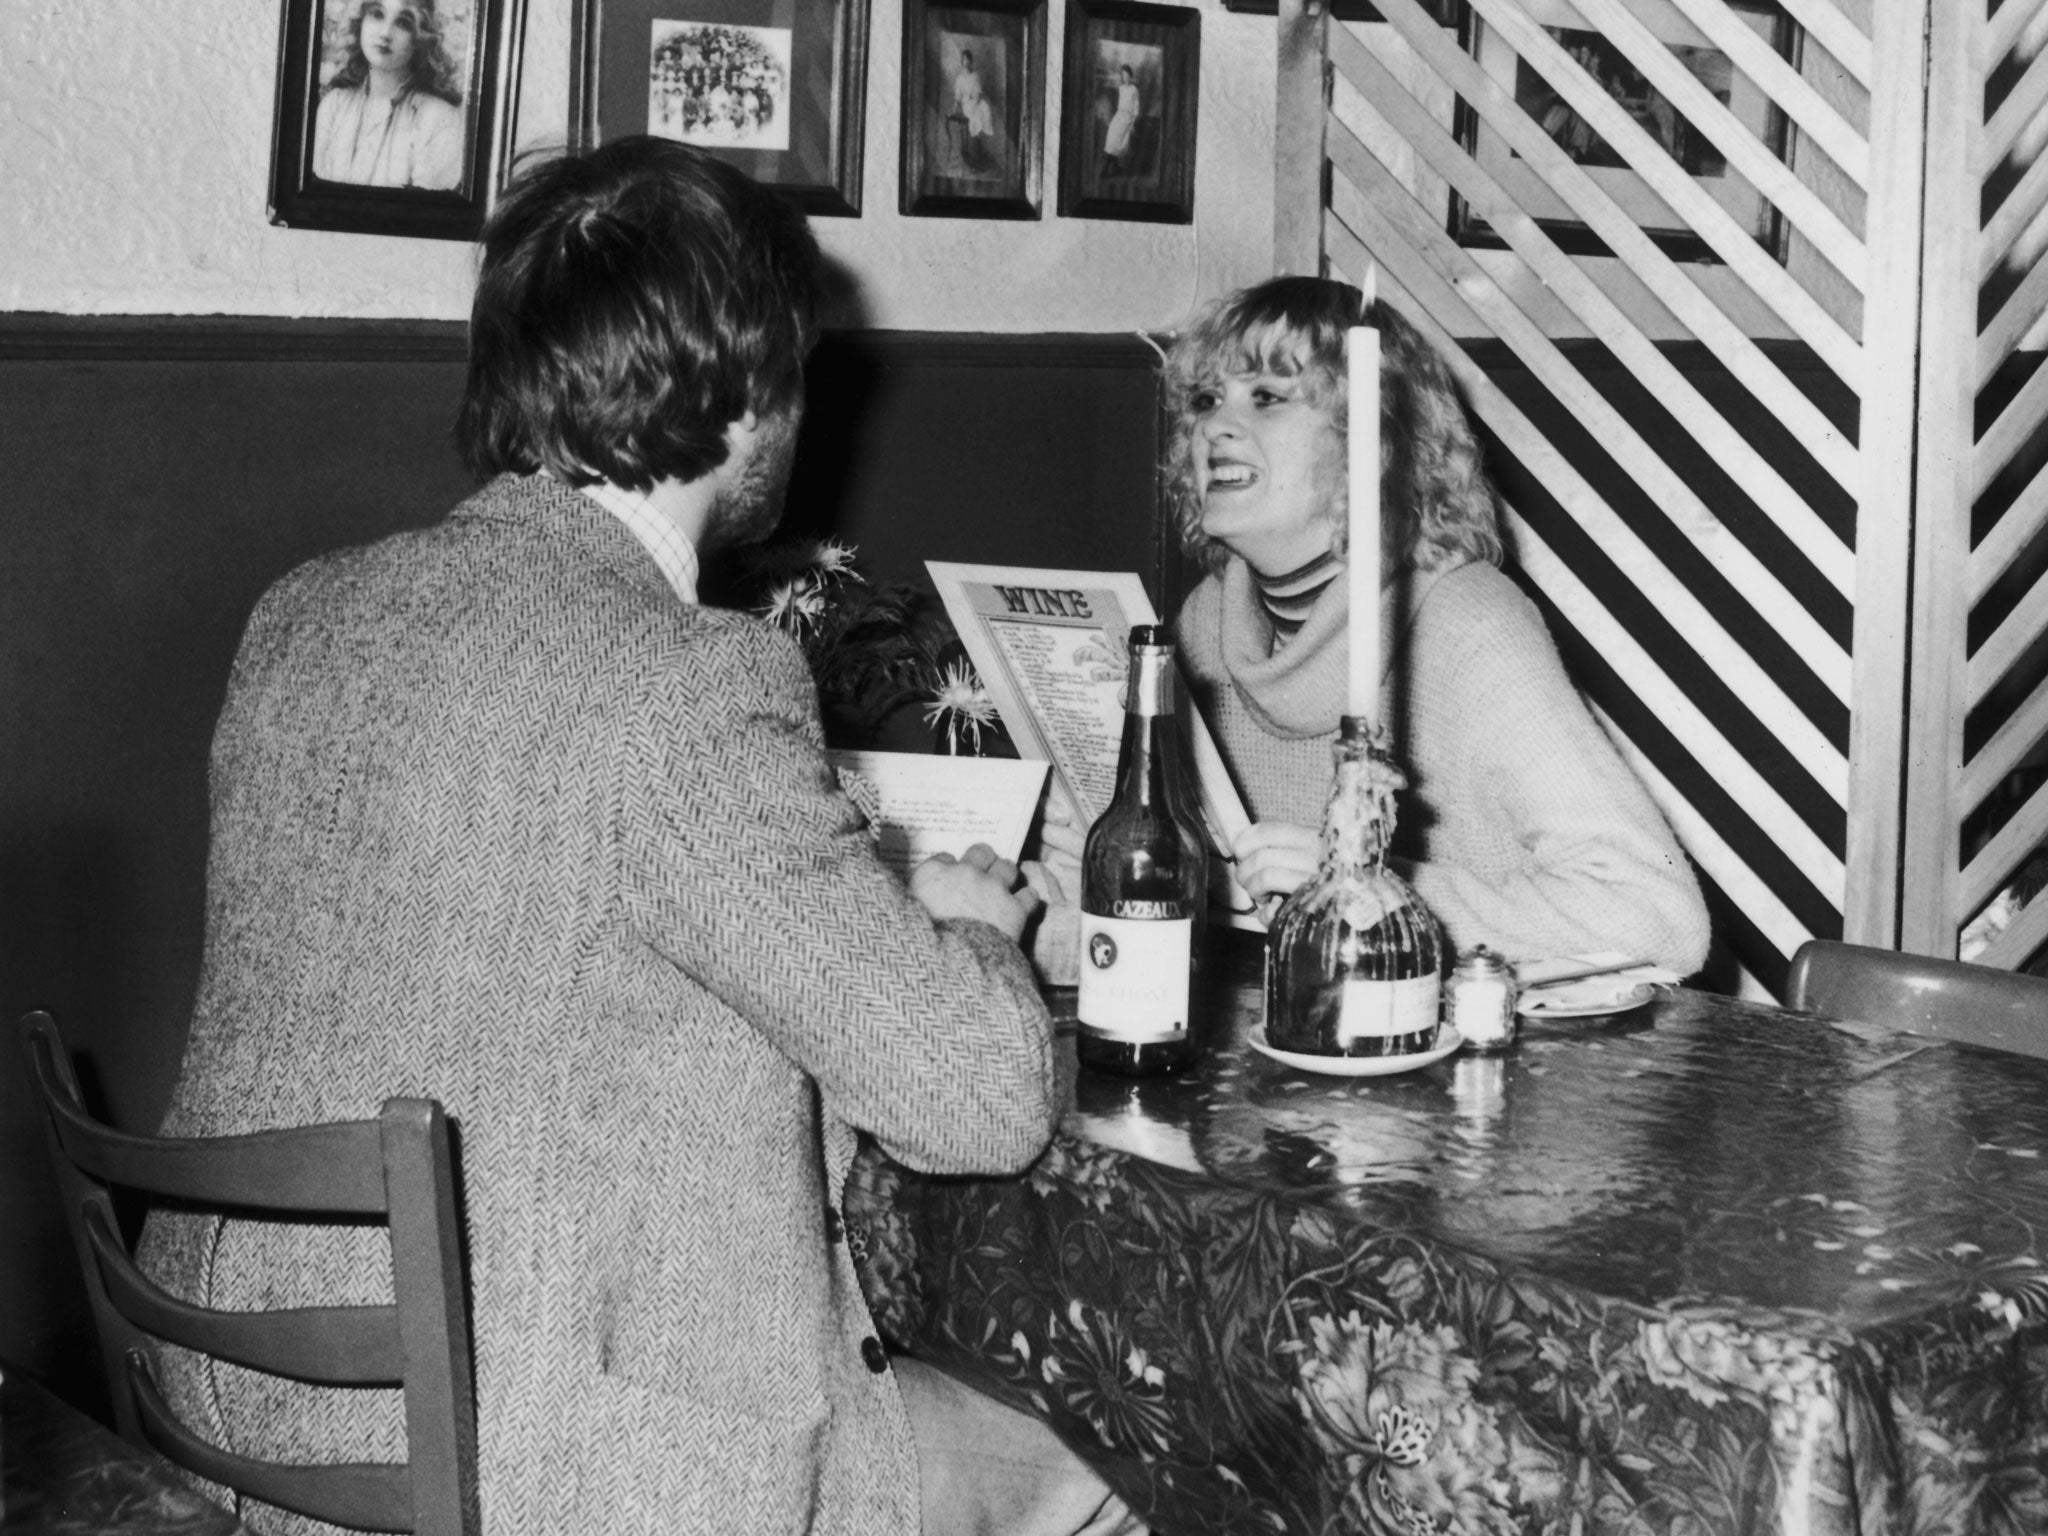 A couple enjoy a dinner in the 70s. Is it still appropriate for a woman to expect a date to pay for all her meals?